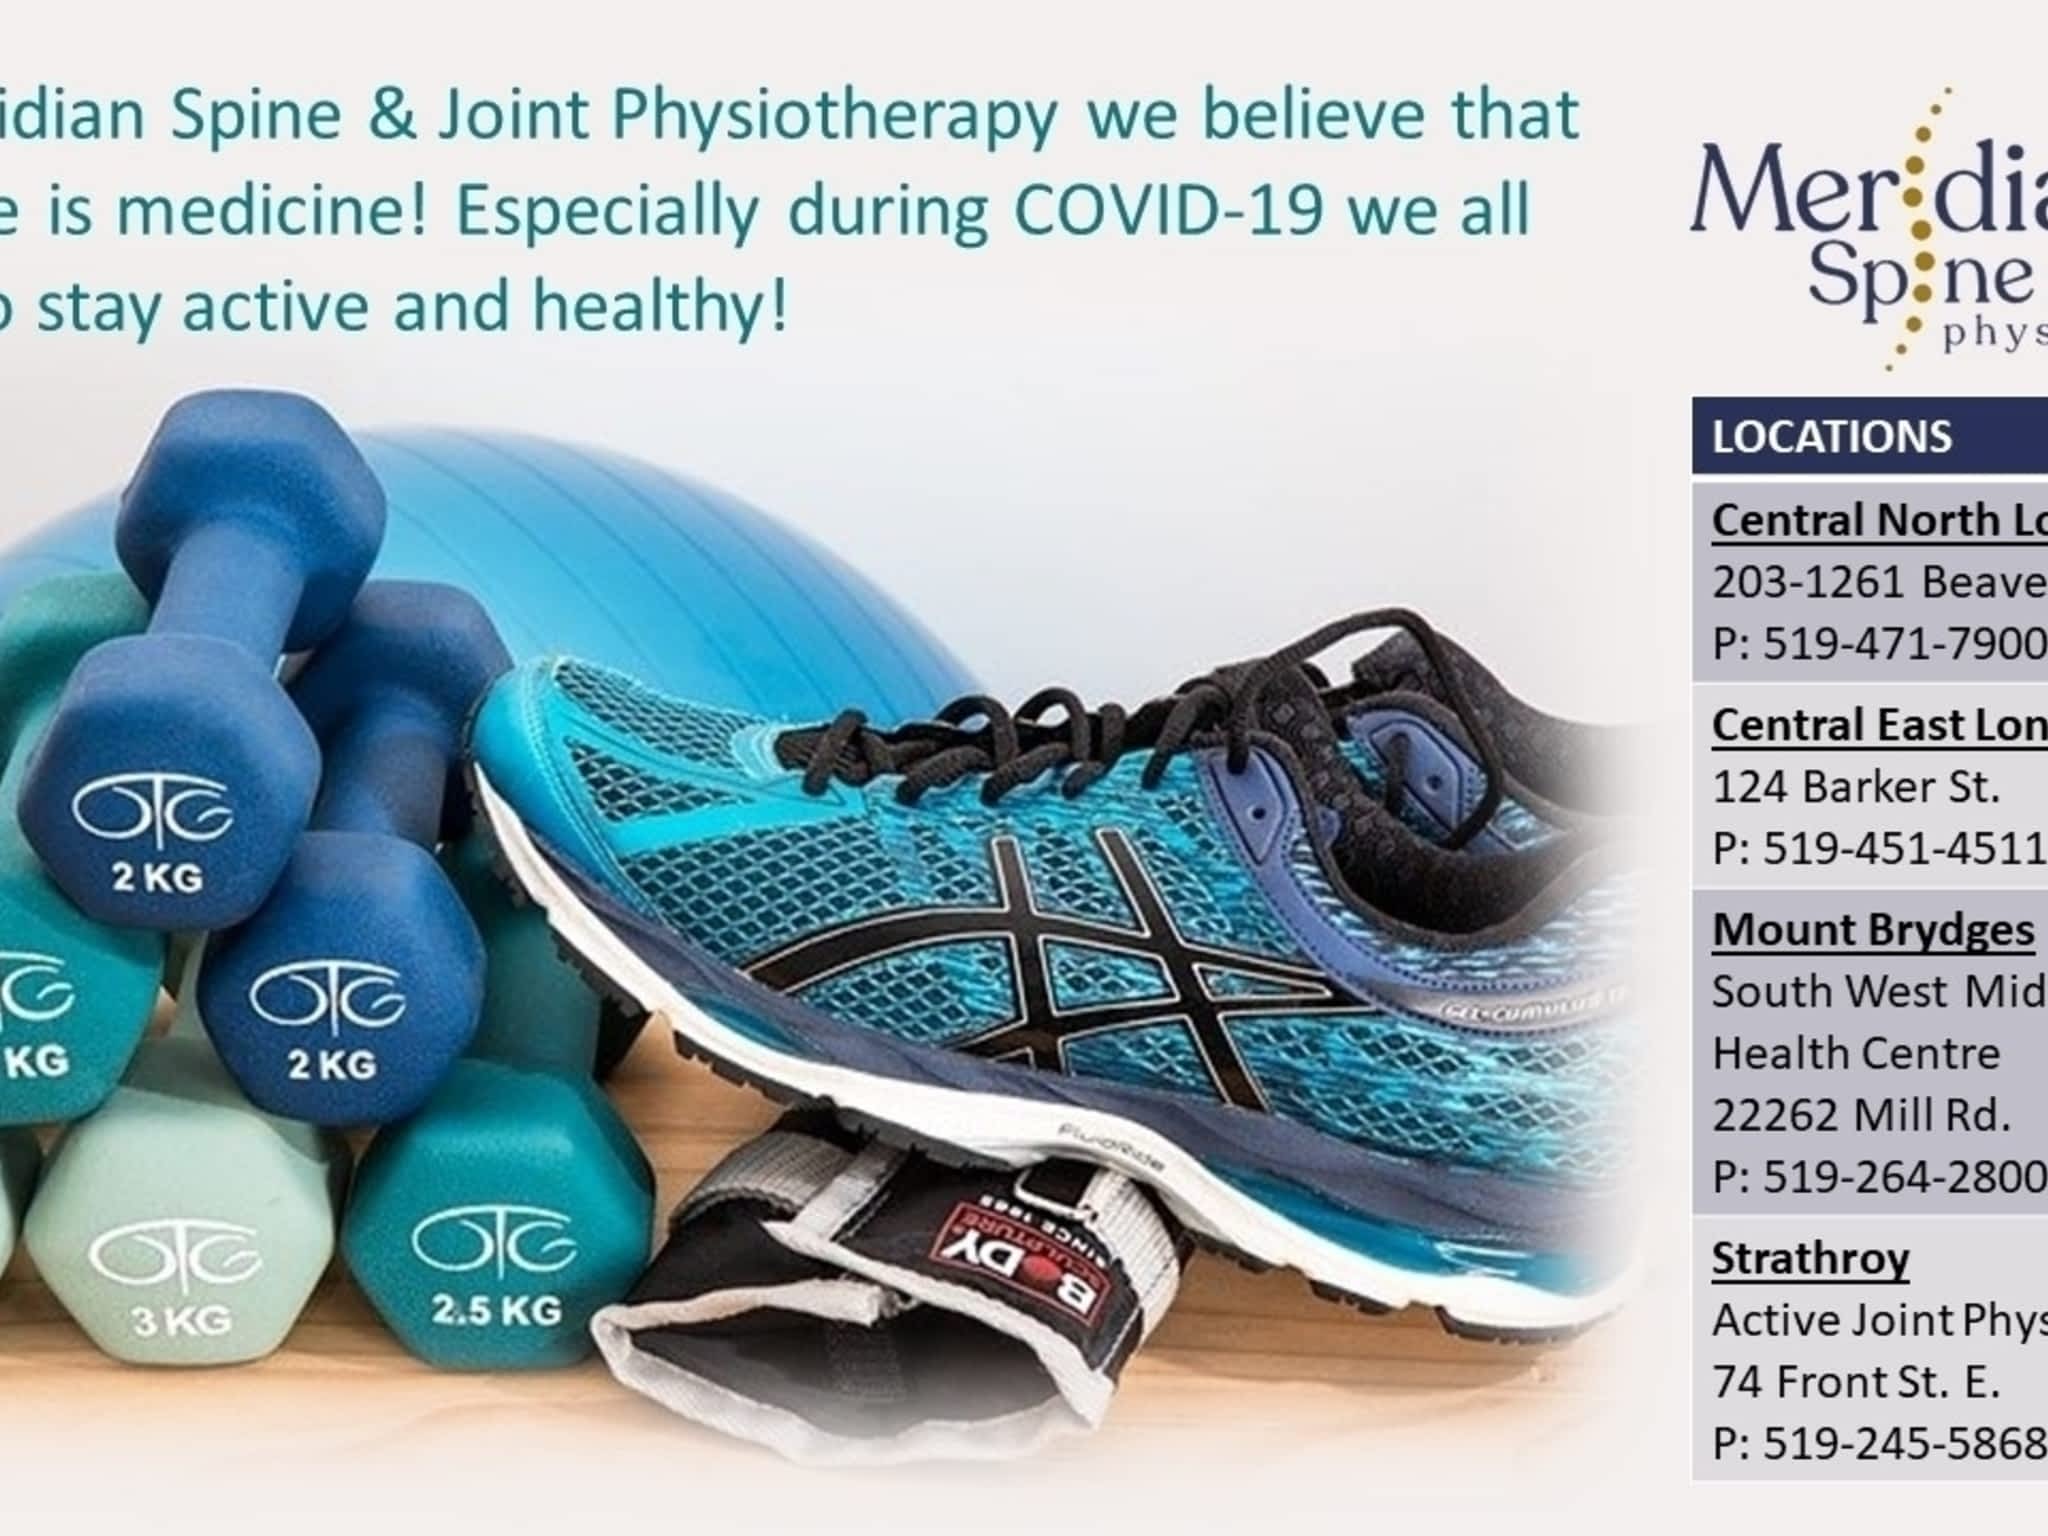 photo Meridian Active Joint Physiotherapy